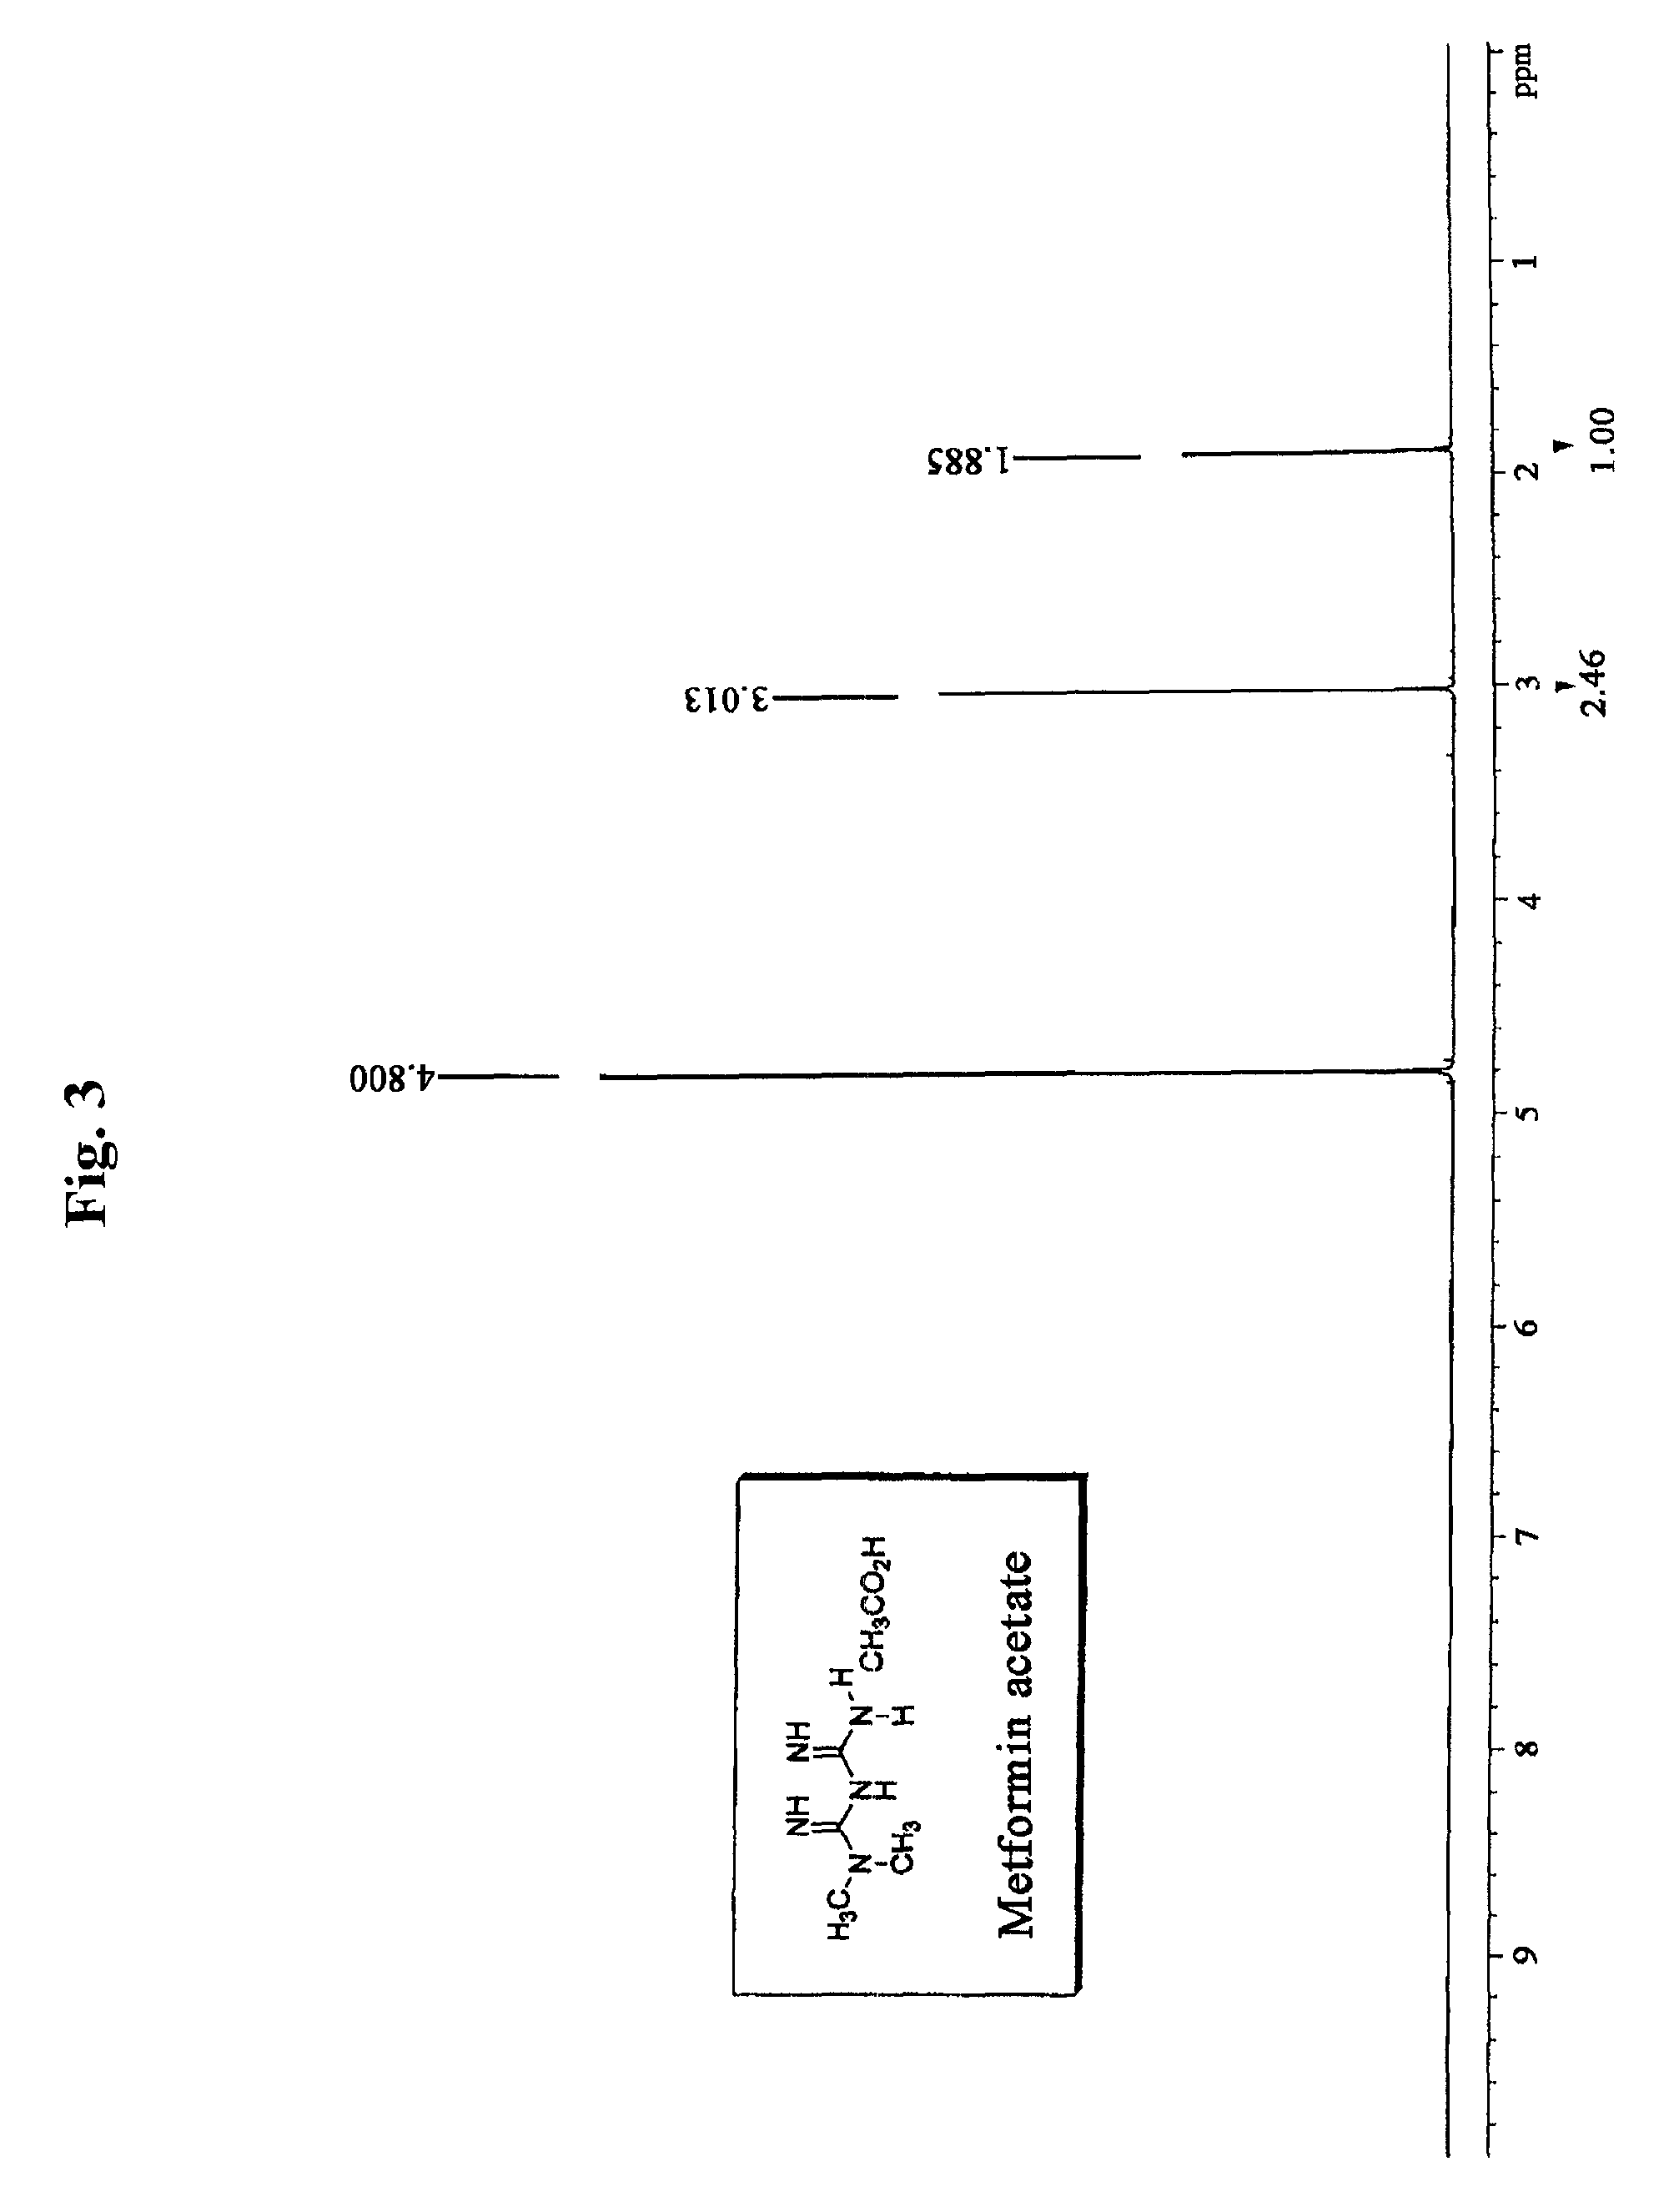 N, N-dimethyl imidodicarbonimidic diamide acetate, method for producing the same and pharmaceutical compositions comprising the same